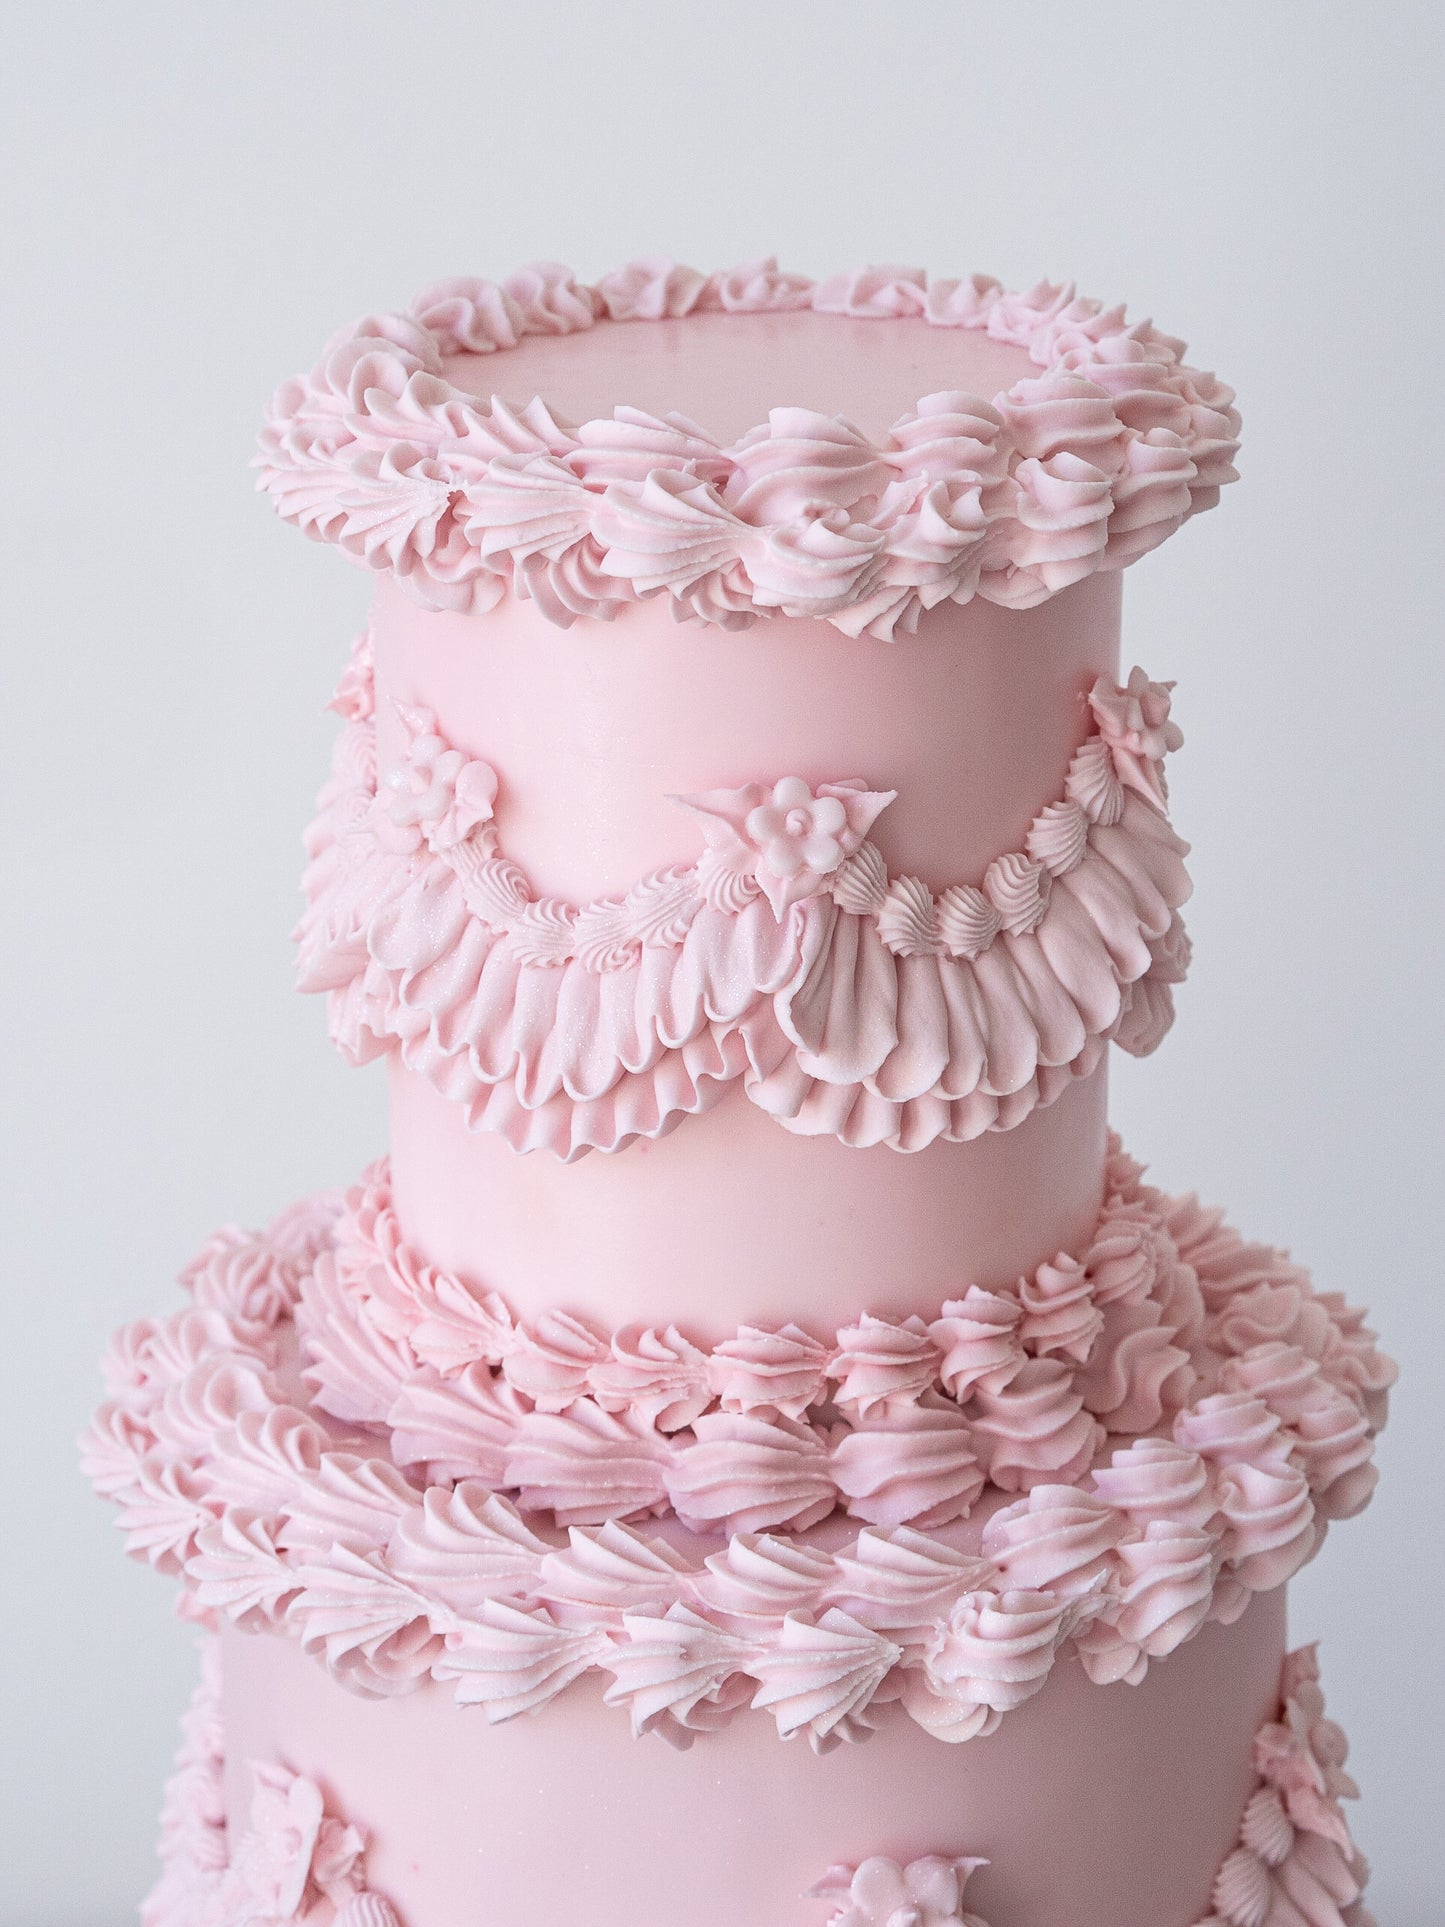 Stylish and budget friendly Indie wedding cake from Manchester based Union Cakes